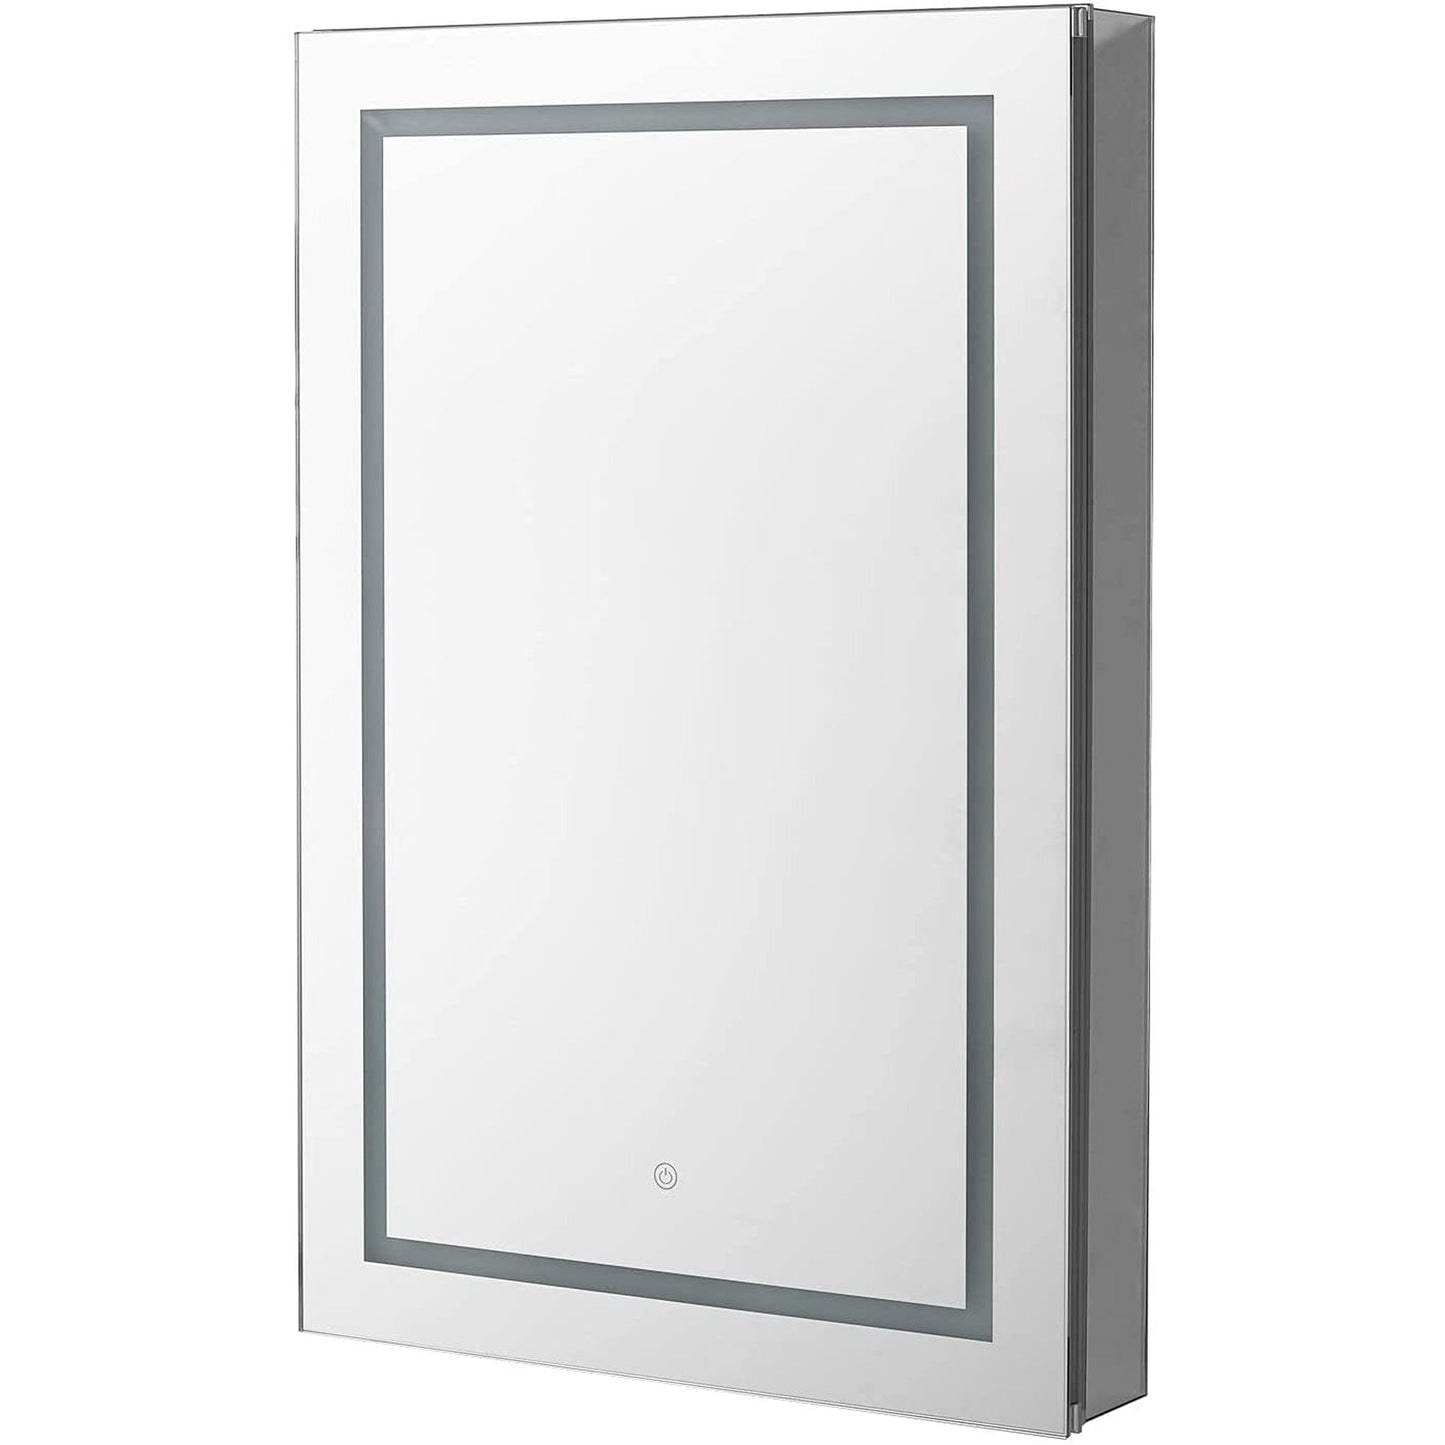 Aquadom Royale Plus 24" x 30" Rectangle Recessed or Surface Mount Single View Right Hinged LED Lighted Bathroom Medicine Cabinet With Defogger, Electrical Outlet, Magnifying Mirror